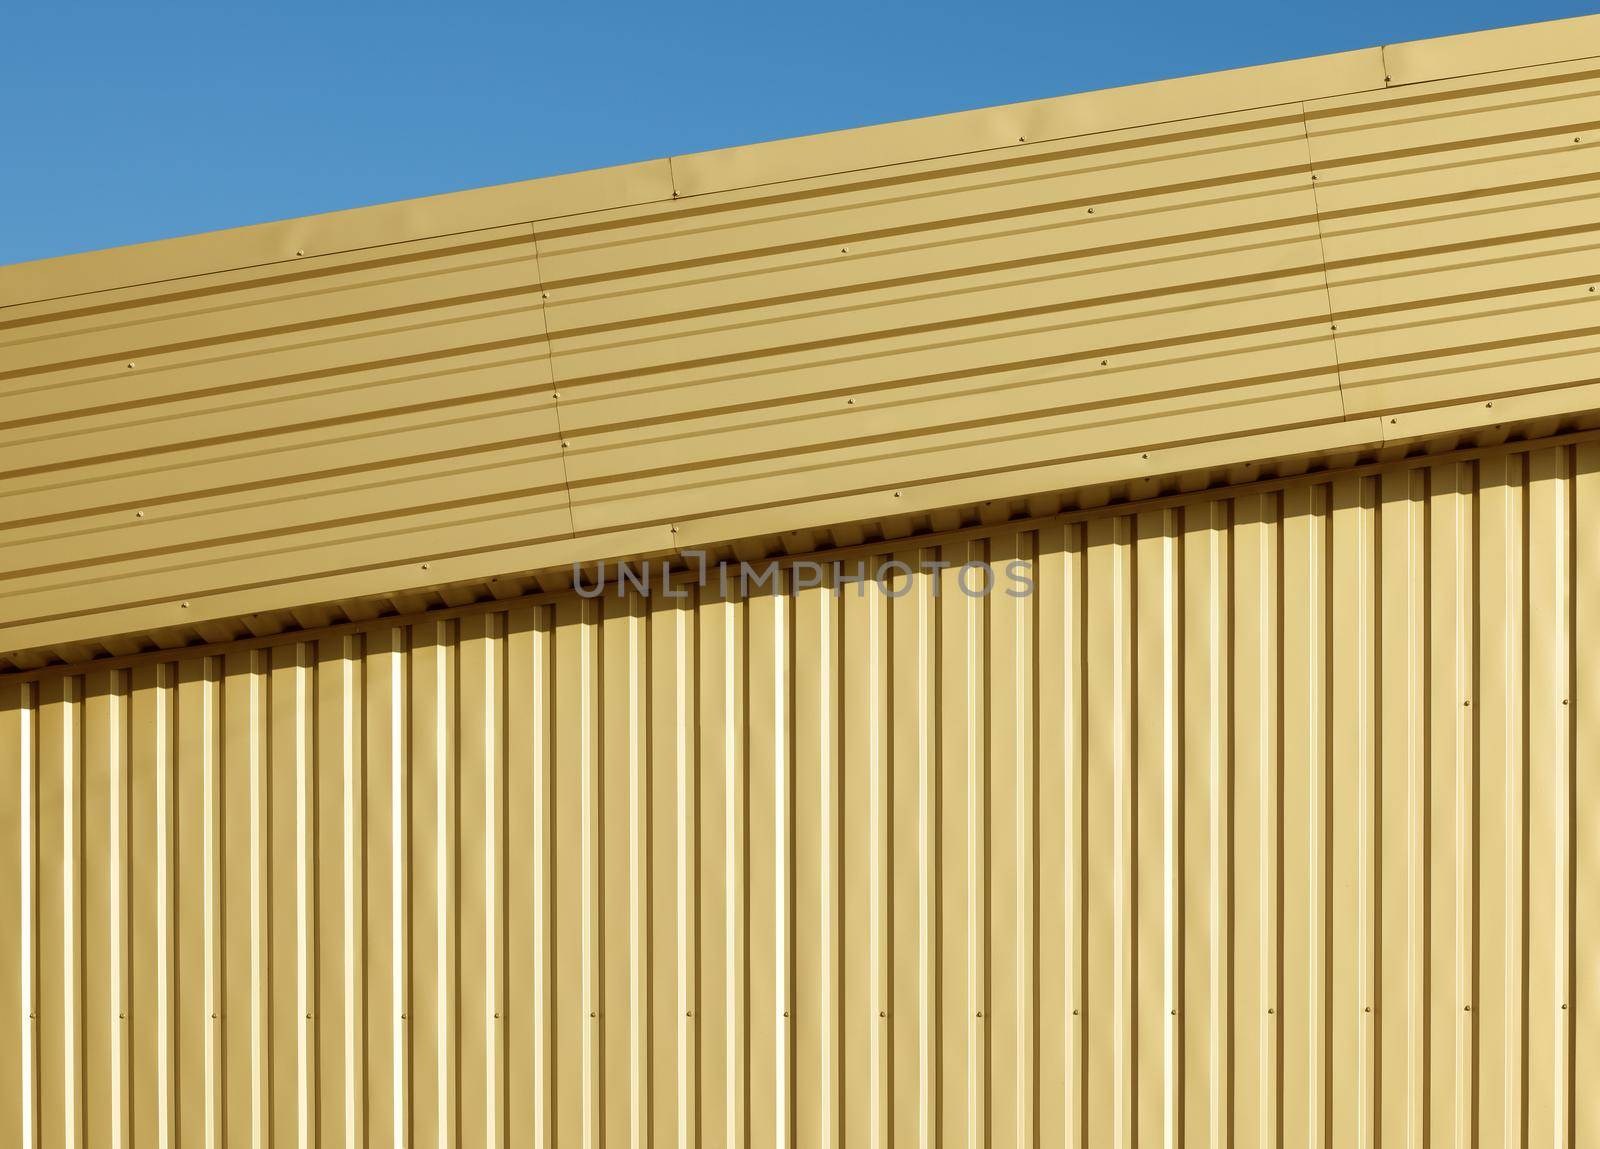 Background texture of golden aluminum corrugated goffered metal wall under blue sky